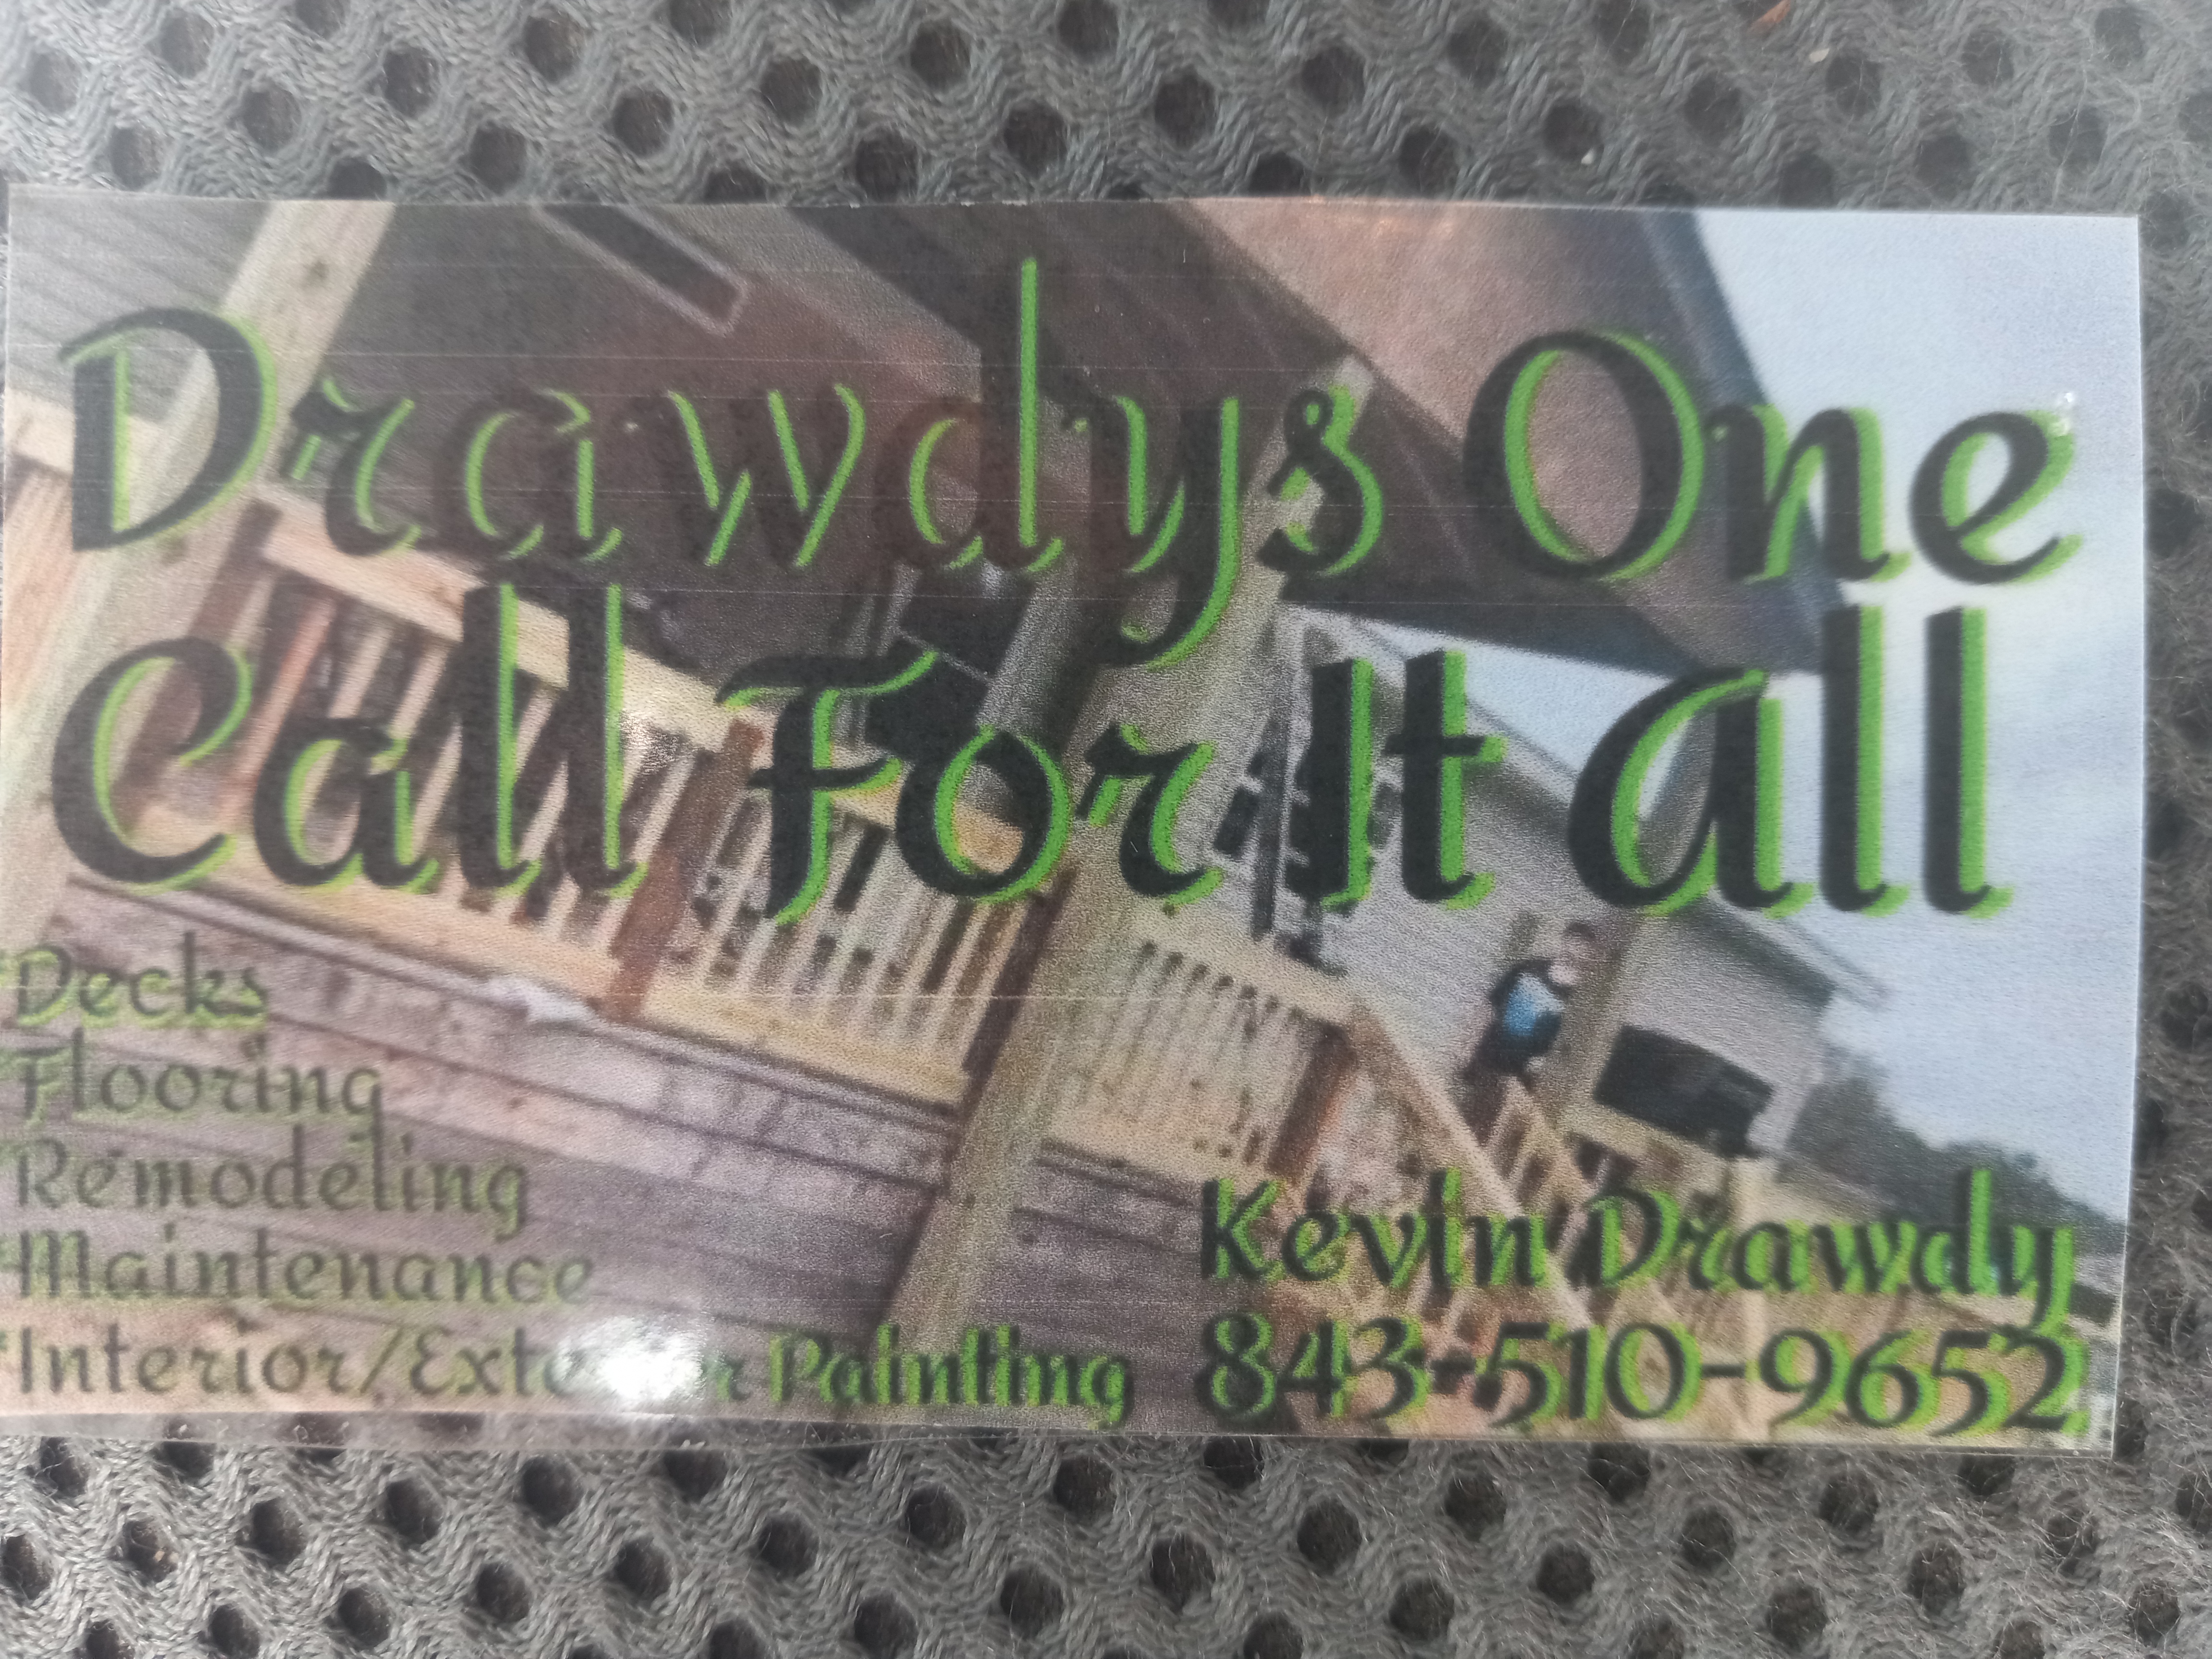 Drawdy's One Call for it All Logo